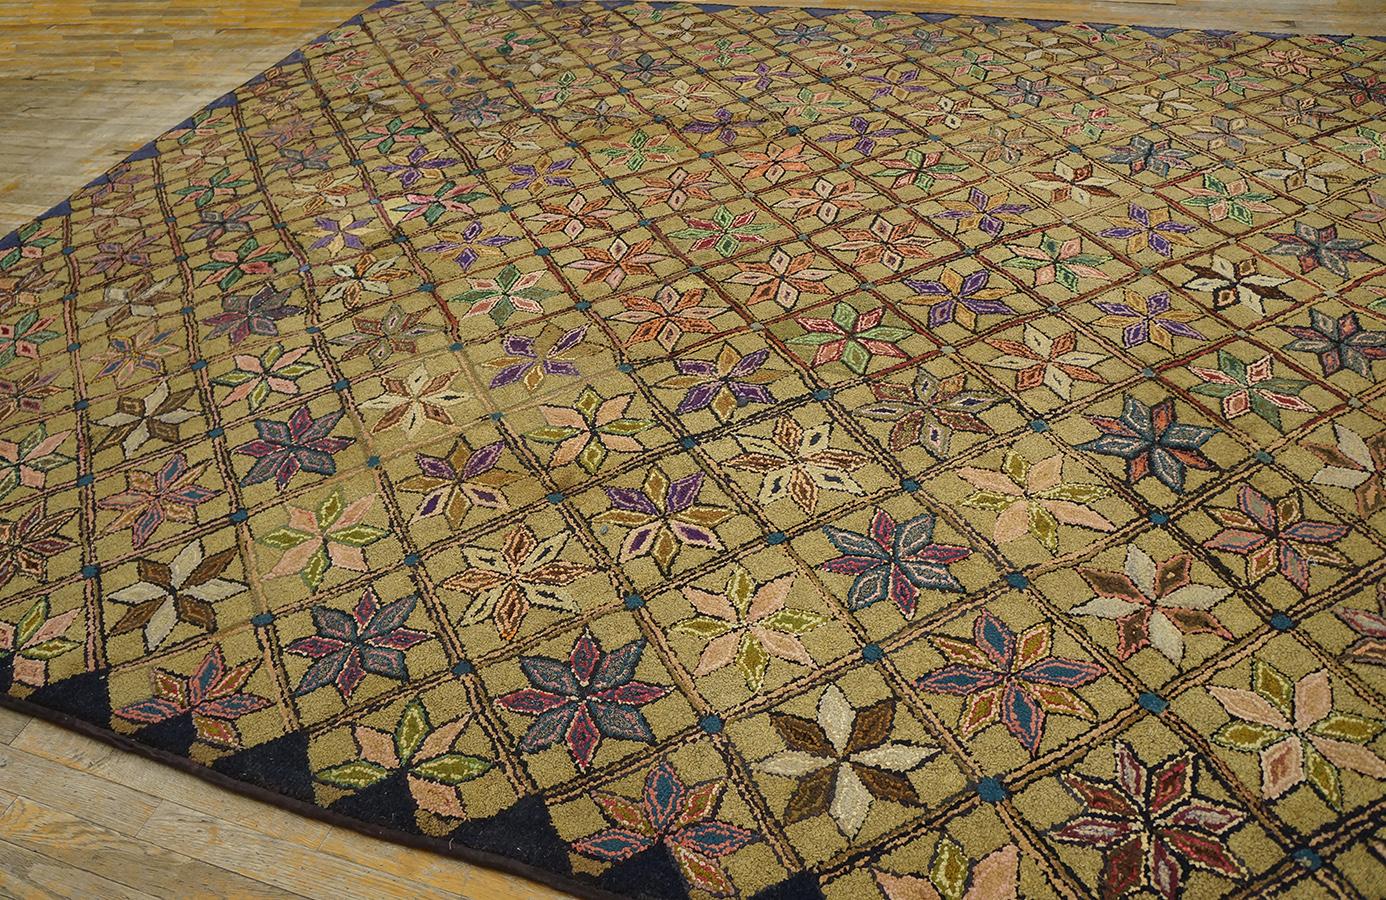 Fabric Early 20th Century American Hooked Rug ( 10' x 12'2